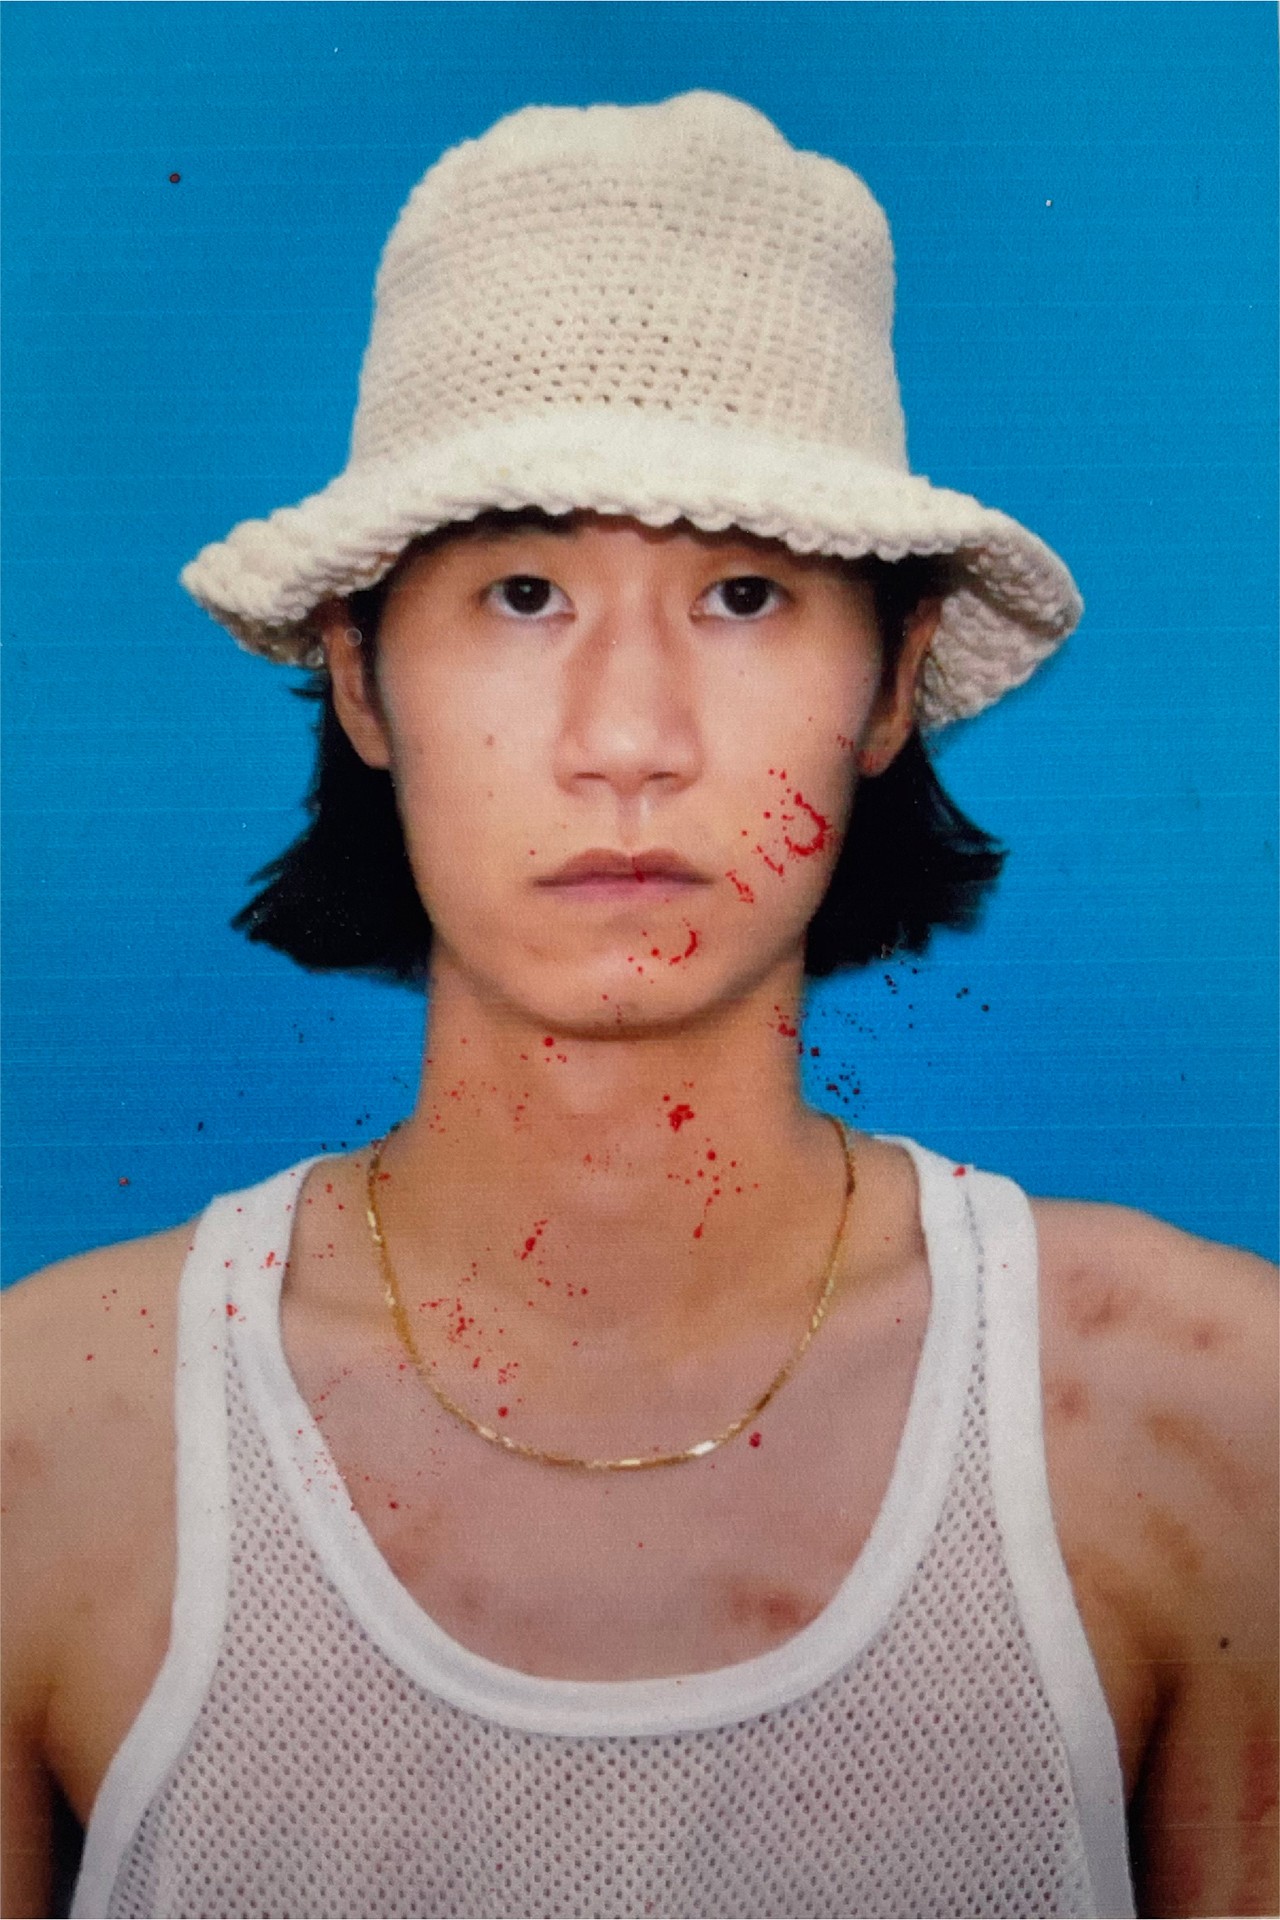 Portrait of the artist wearing a mesh white thank top, a thin gold chain, and a white bucket hat. Splash of blood is digitally added across his face. 